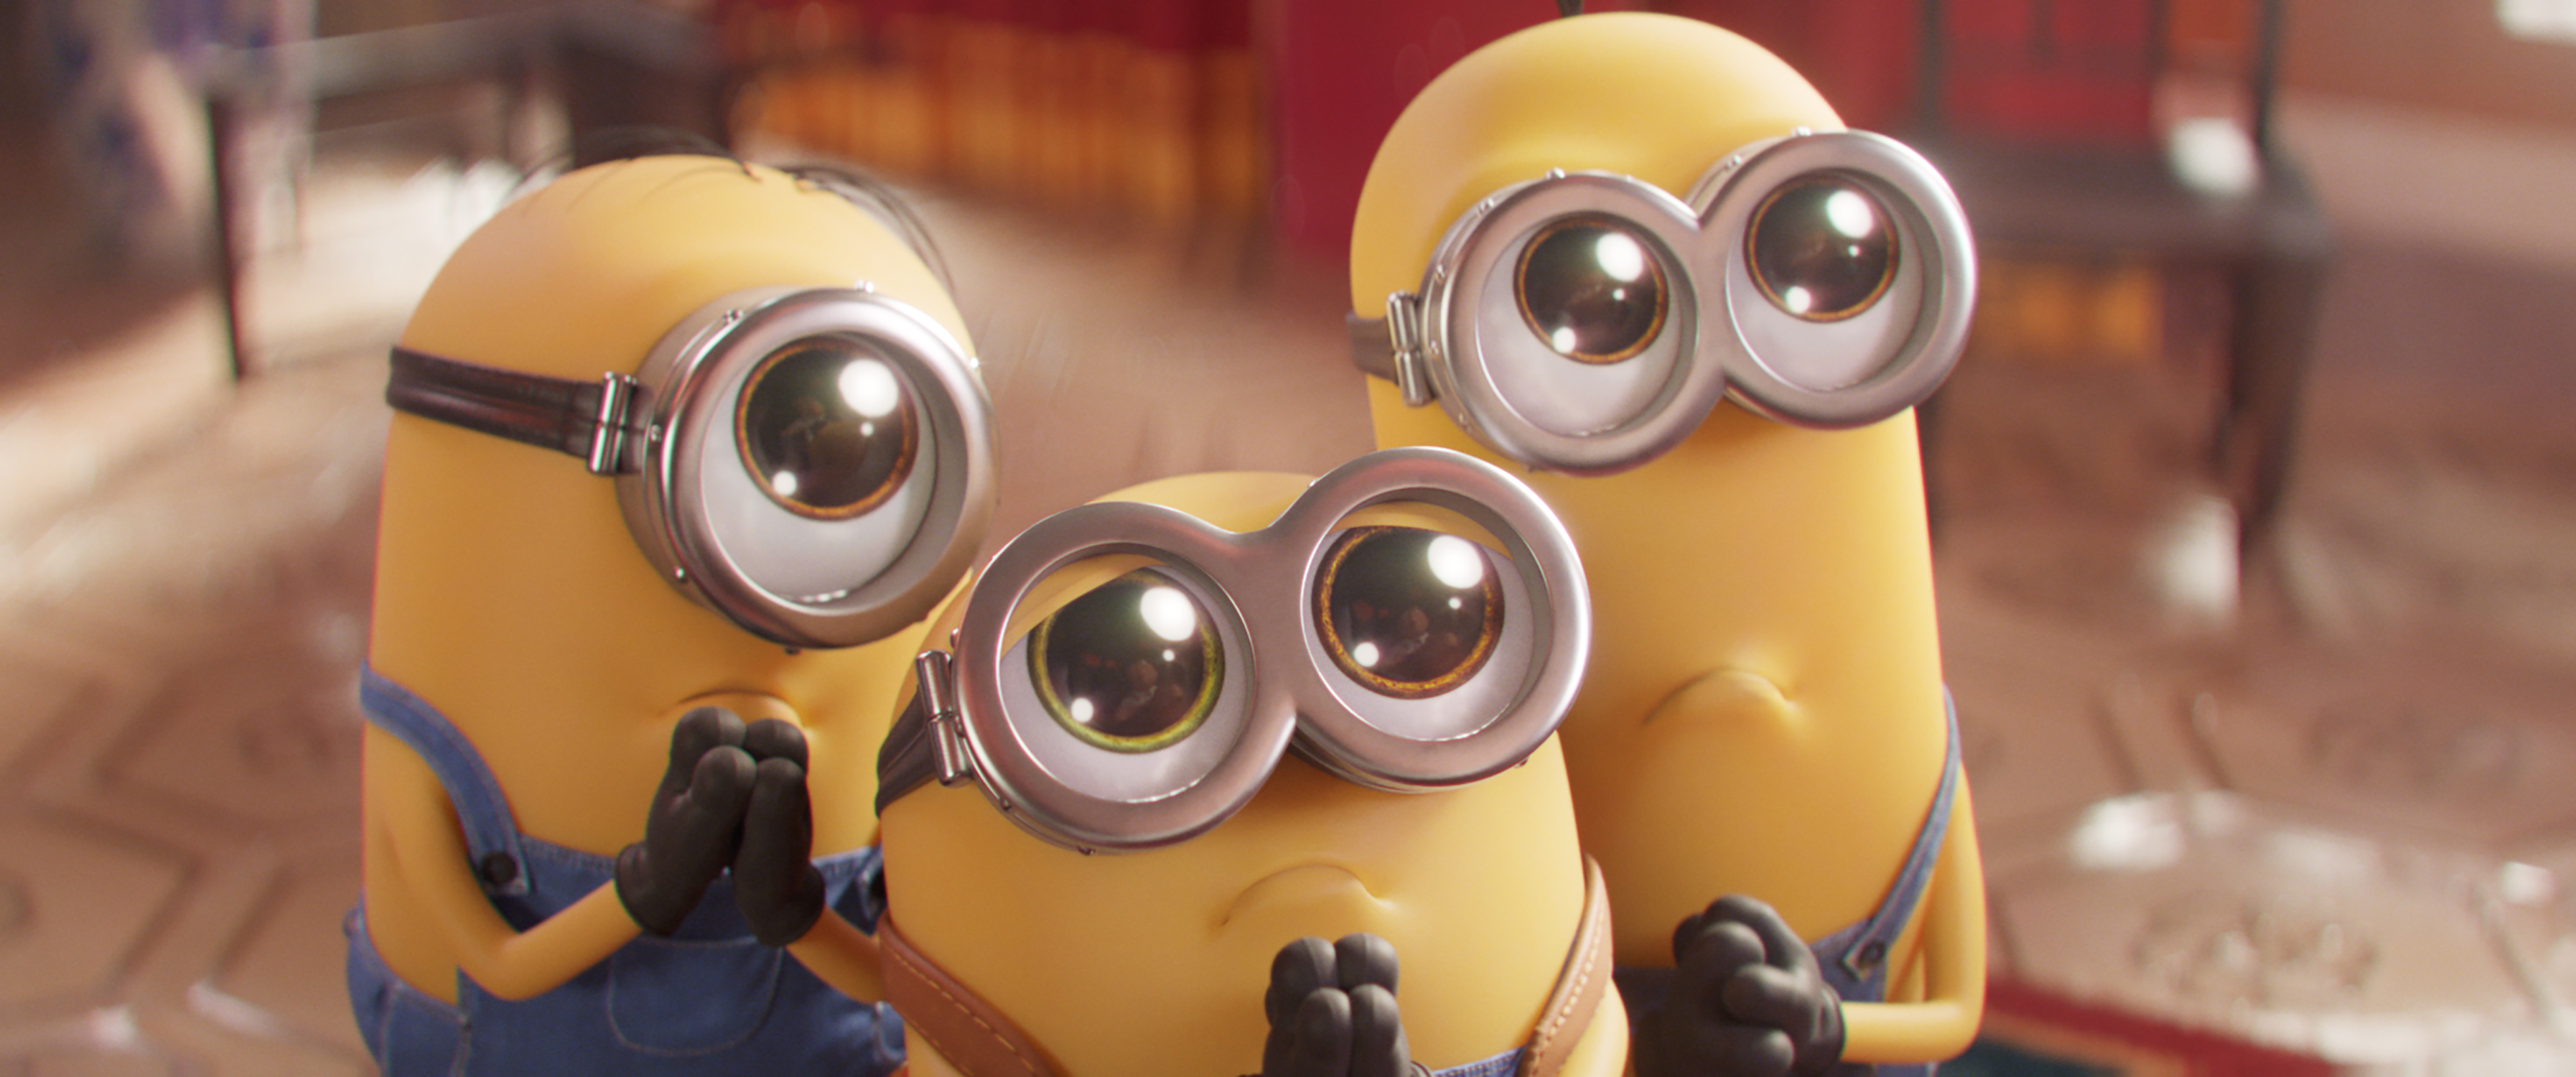 Watch The First Minions 2 The Rise Of Gru Trailer